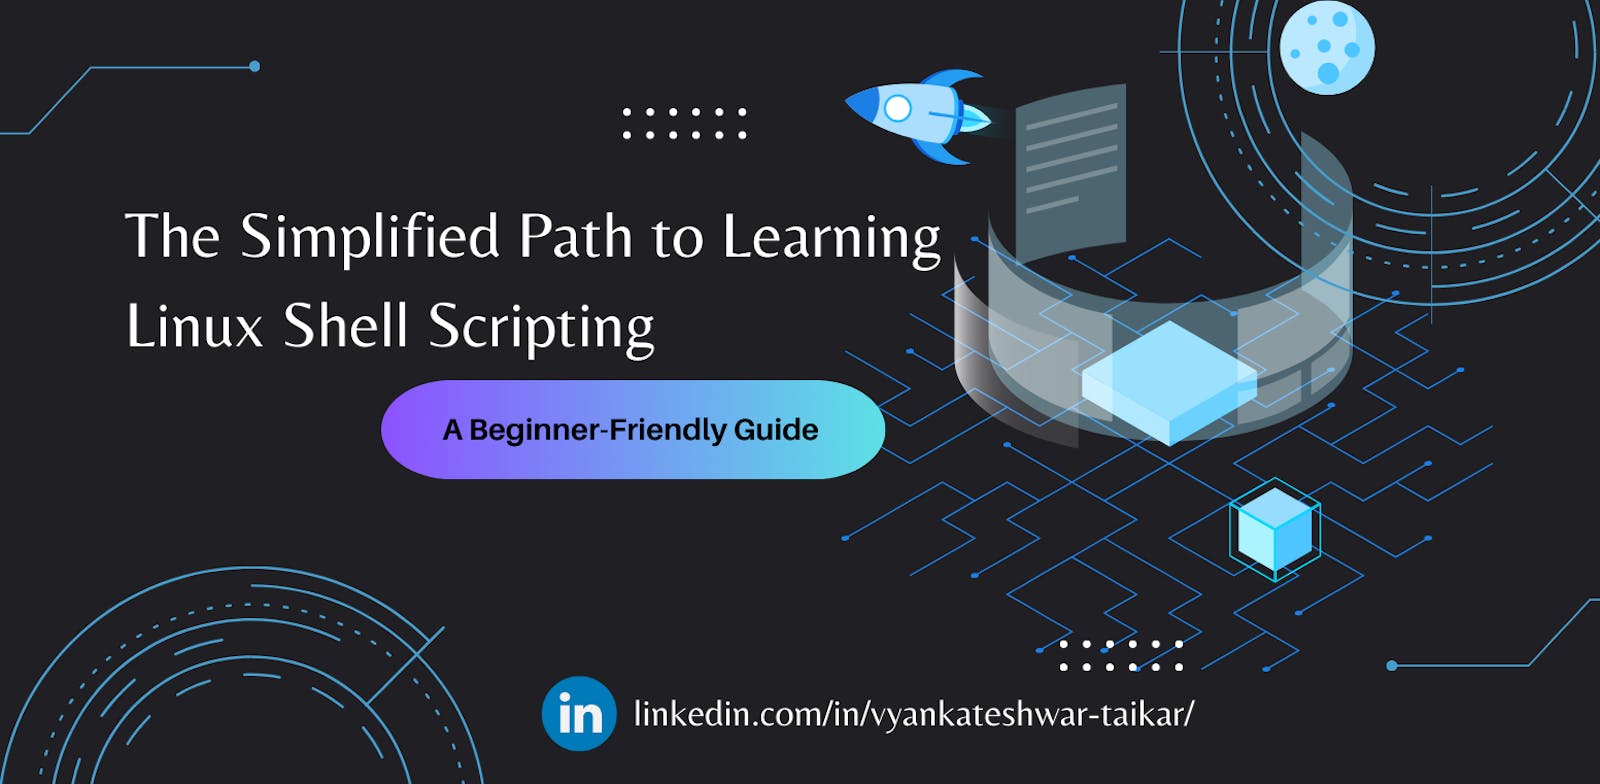 The Simplified Path to Learning Linux Shell Scripting: A Beginner-Friendly Guide